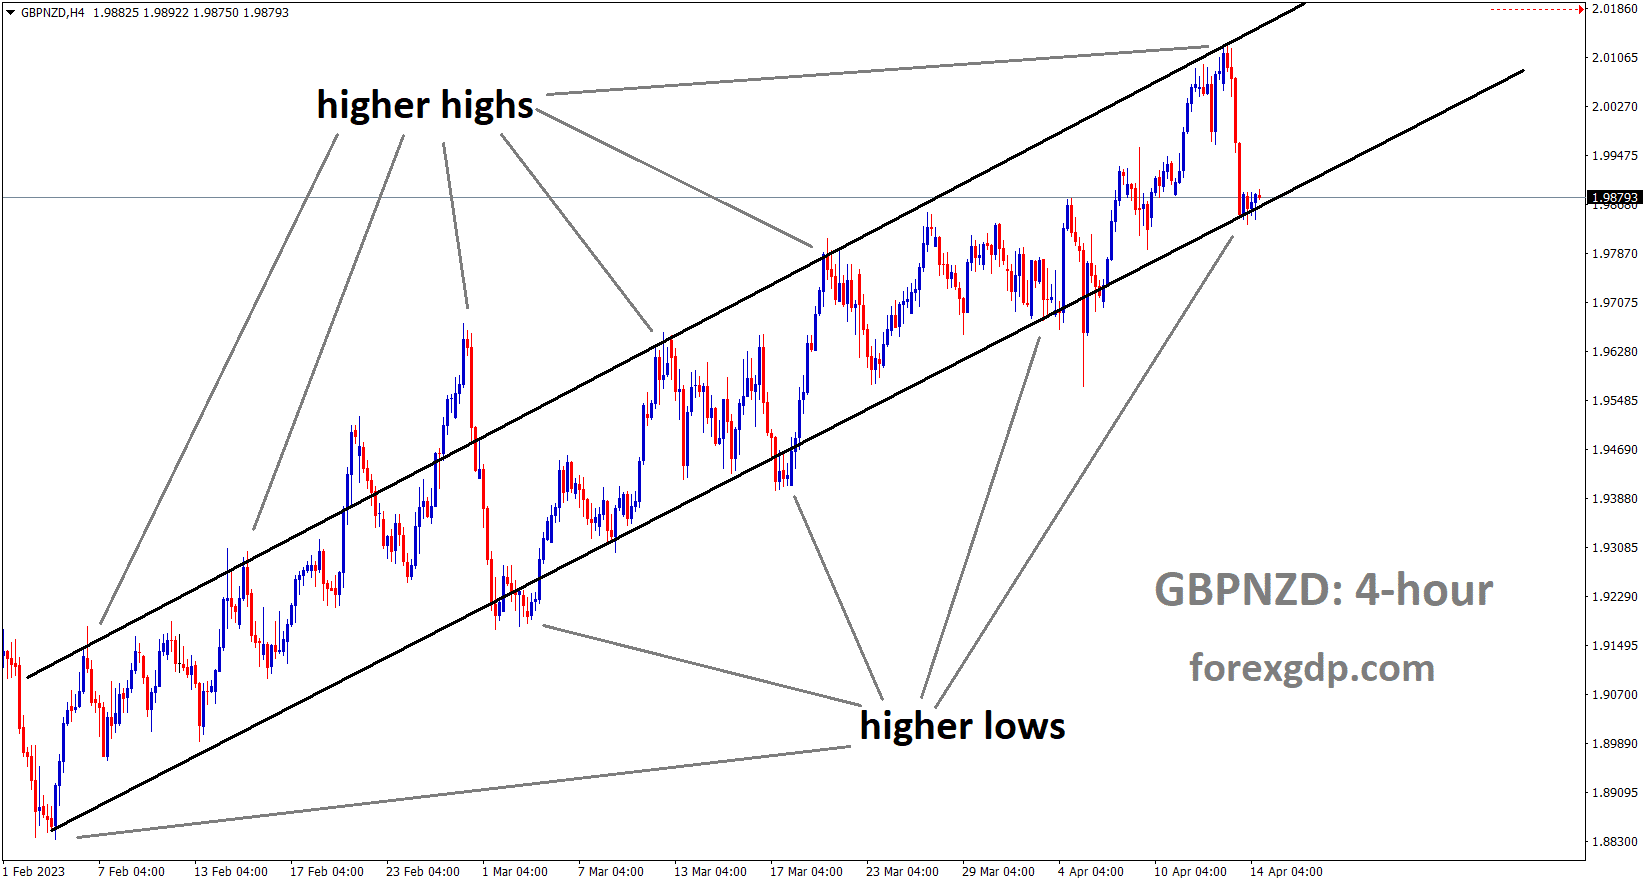 GBPNZD is moving in an Ascending channel and the market has reached the higher low area of the channel